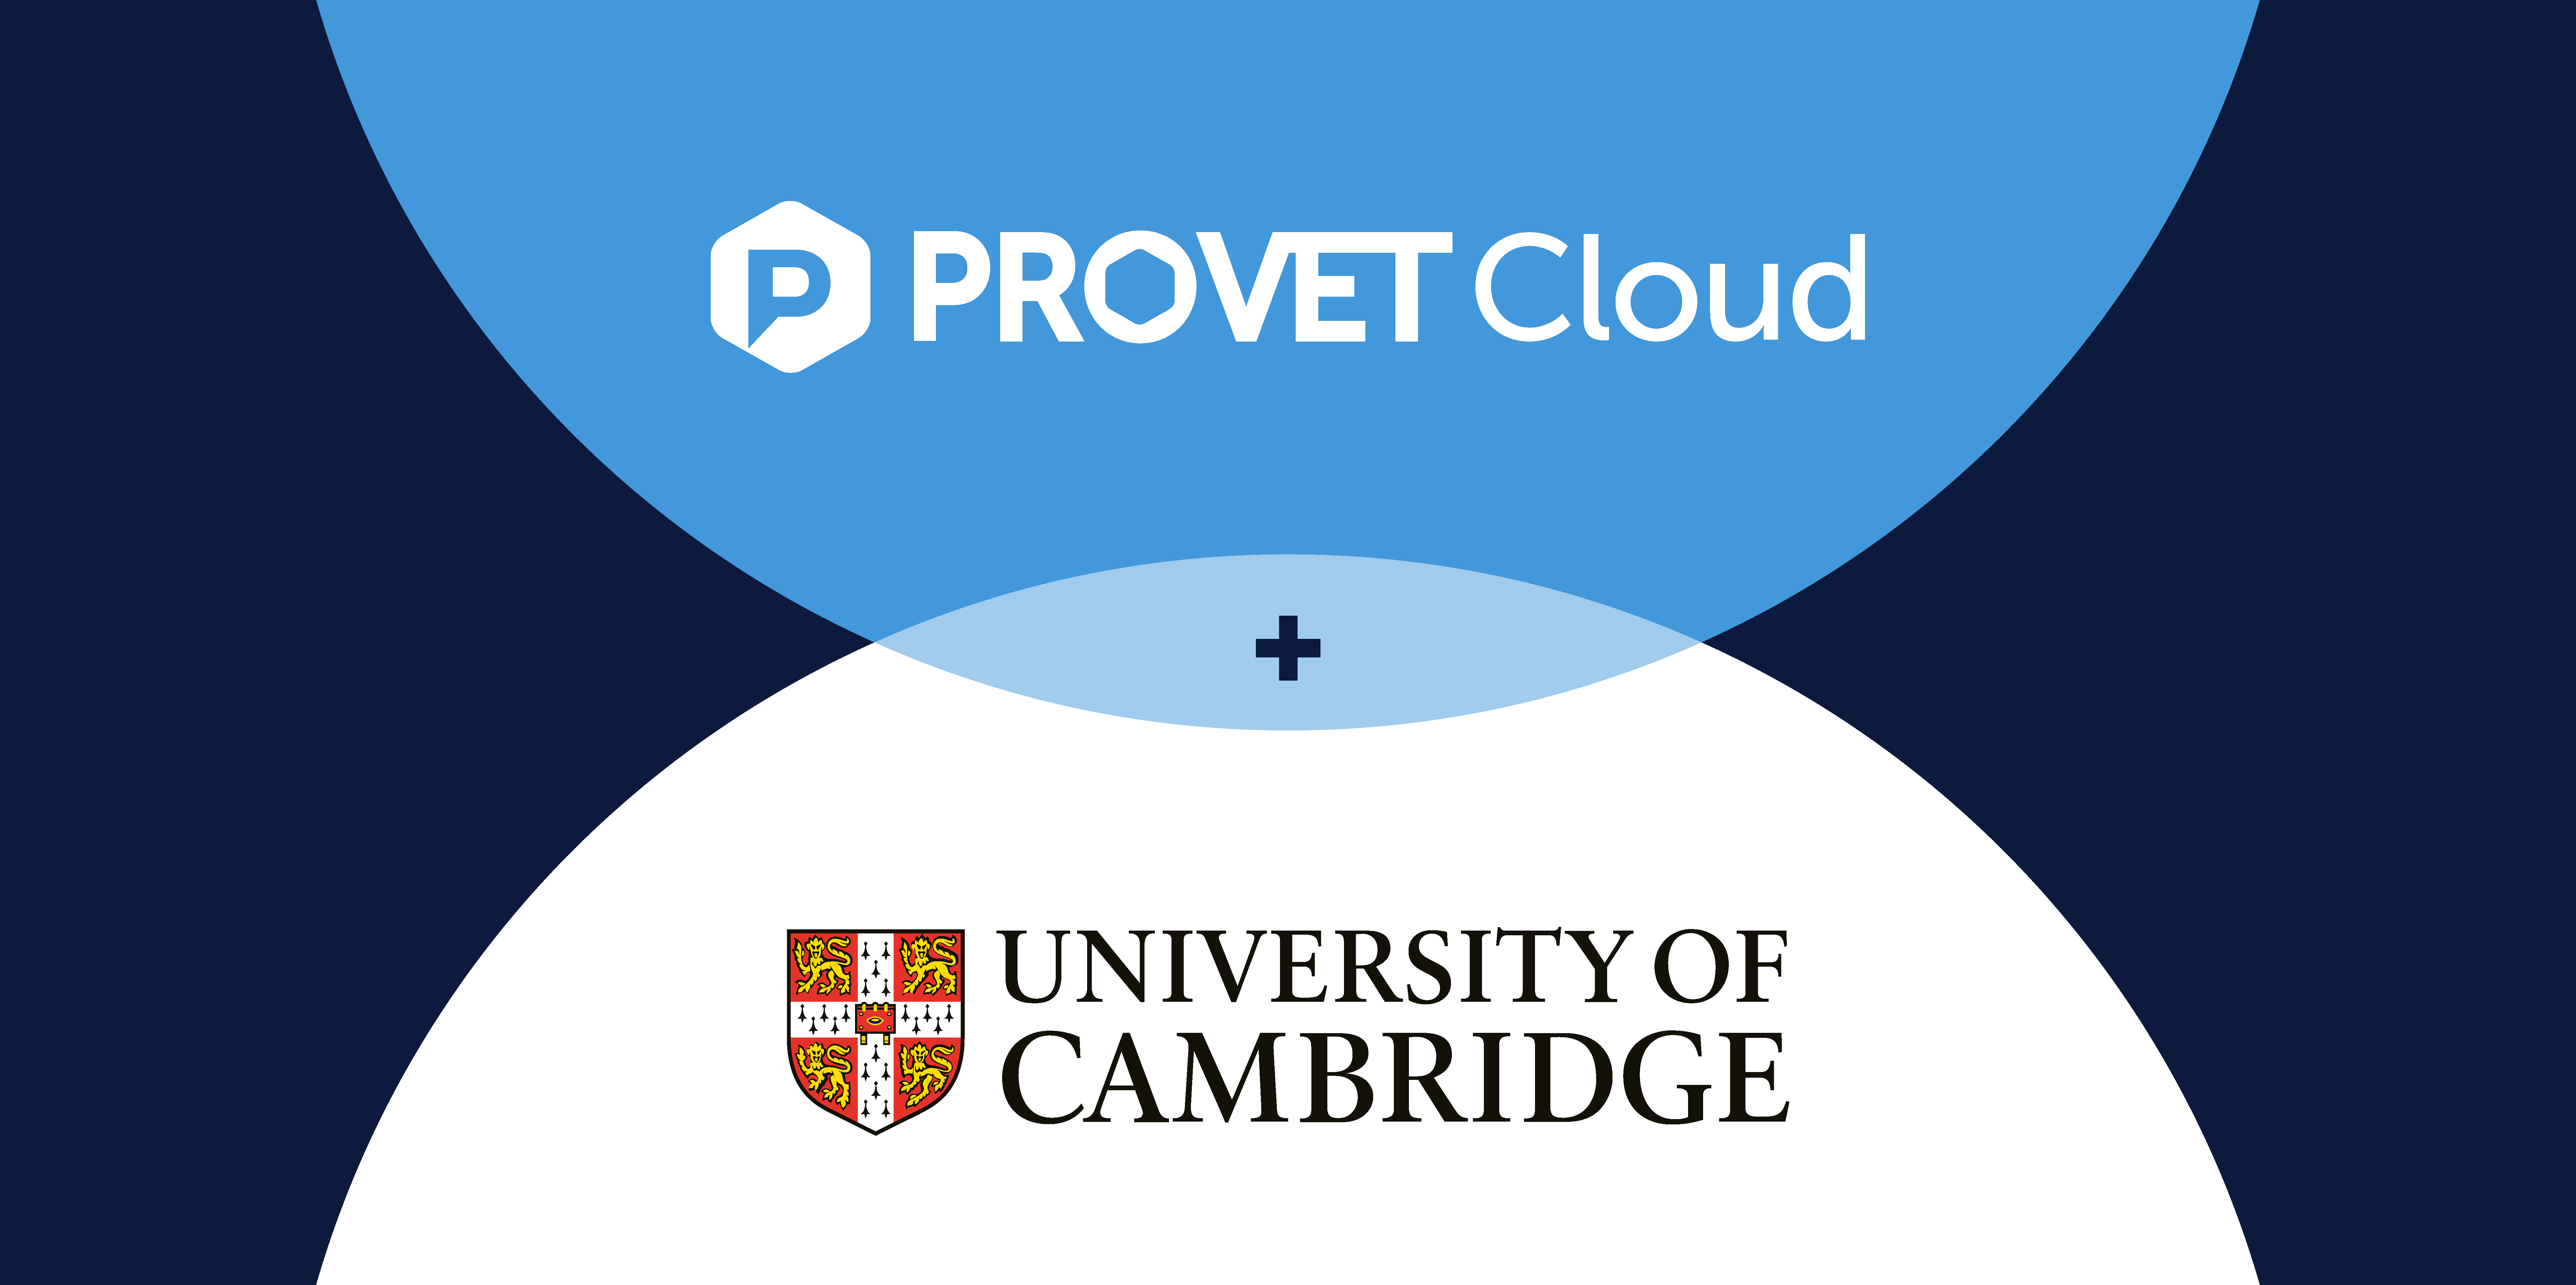 The Queen's Veterinary School Hospital, University of Cambridge selects Provet Cloud to transform hospital care